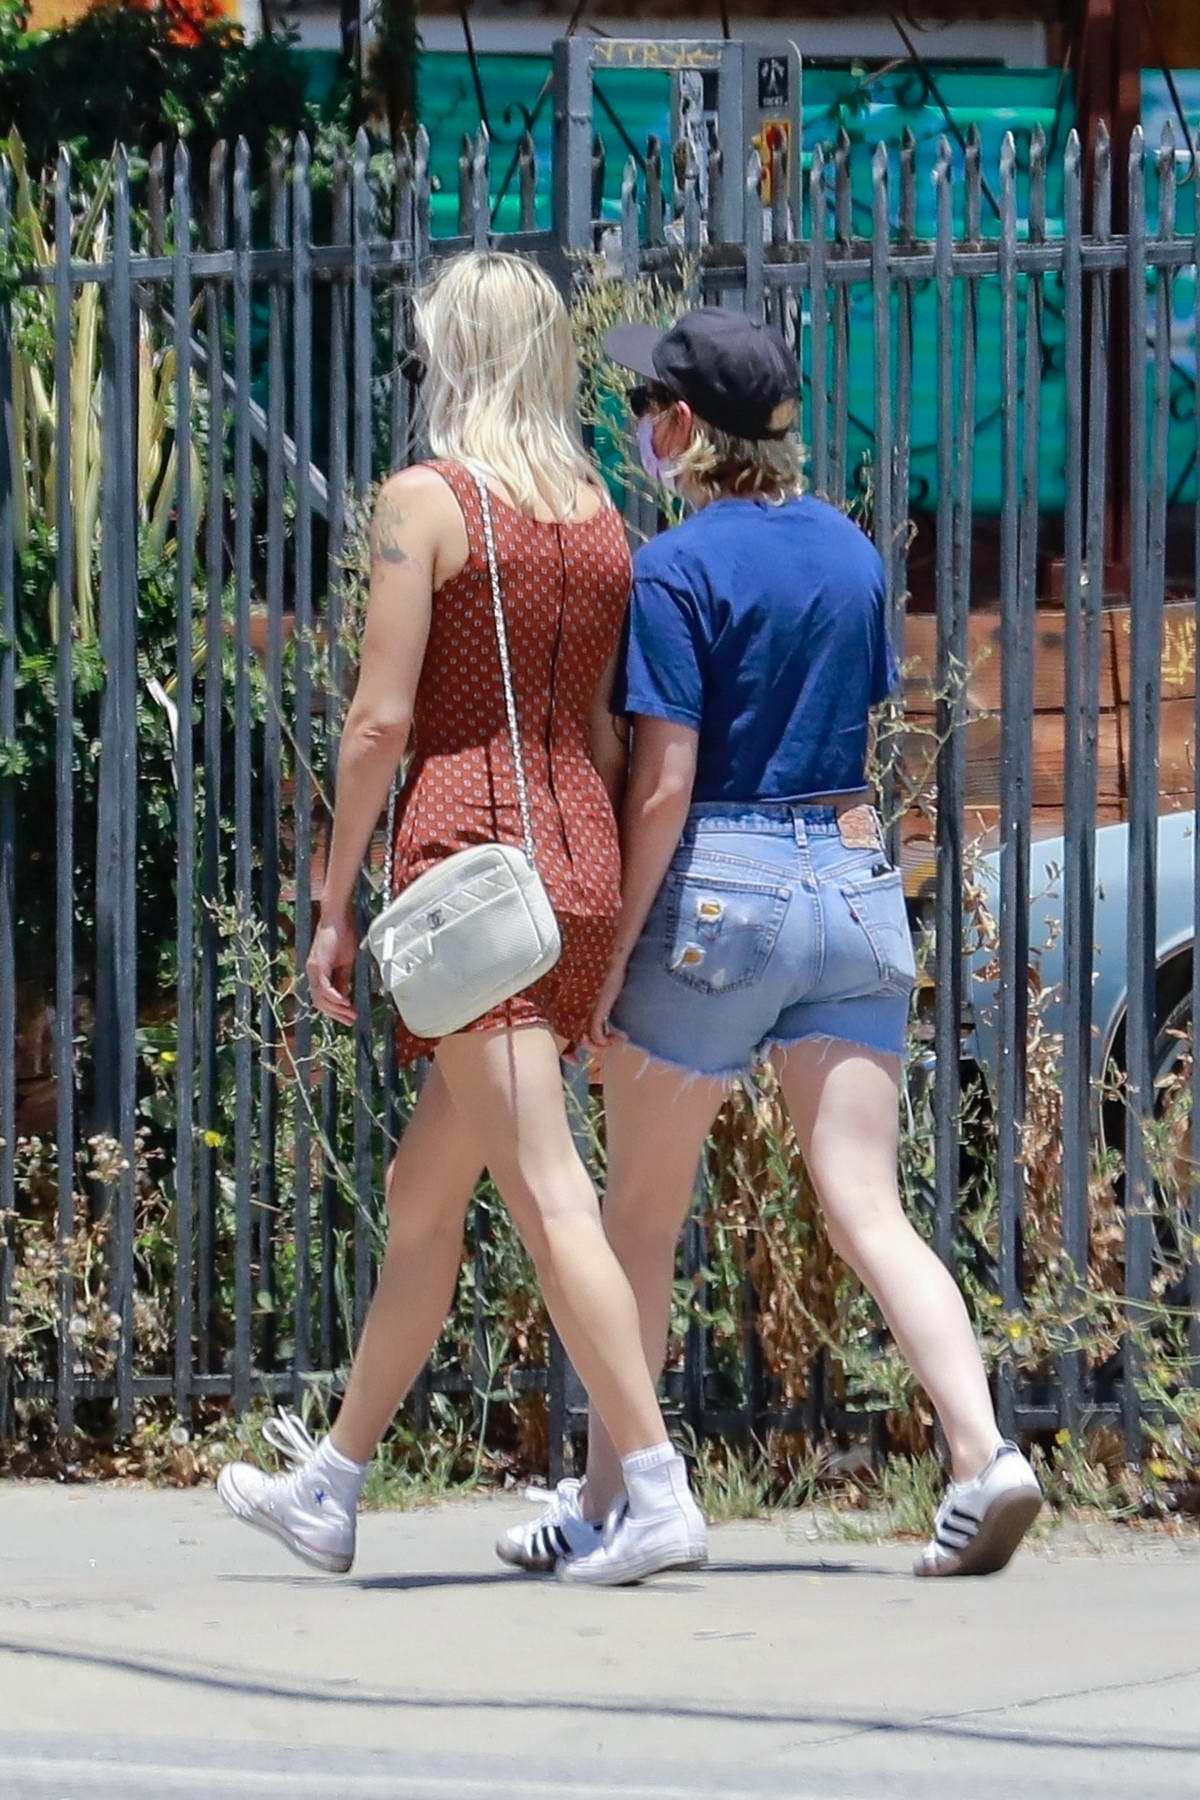 Kristen Stewart and Girlfriend Dylan Meyer Seen Holding Hands While Taking  a Stroll in Los Angeles